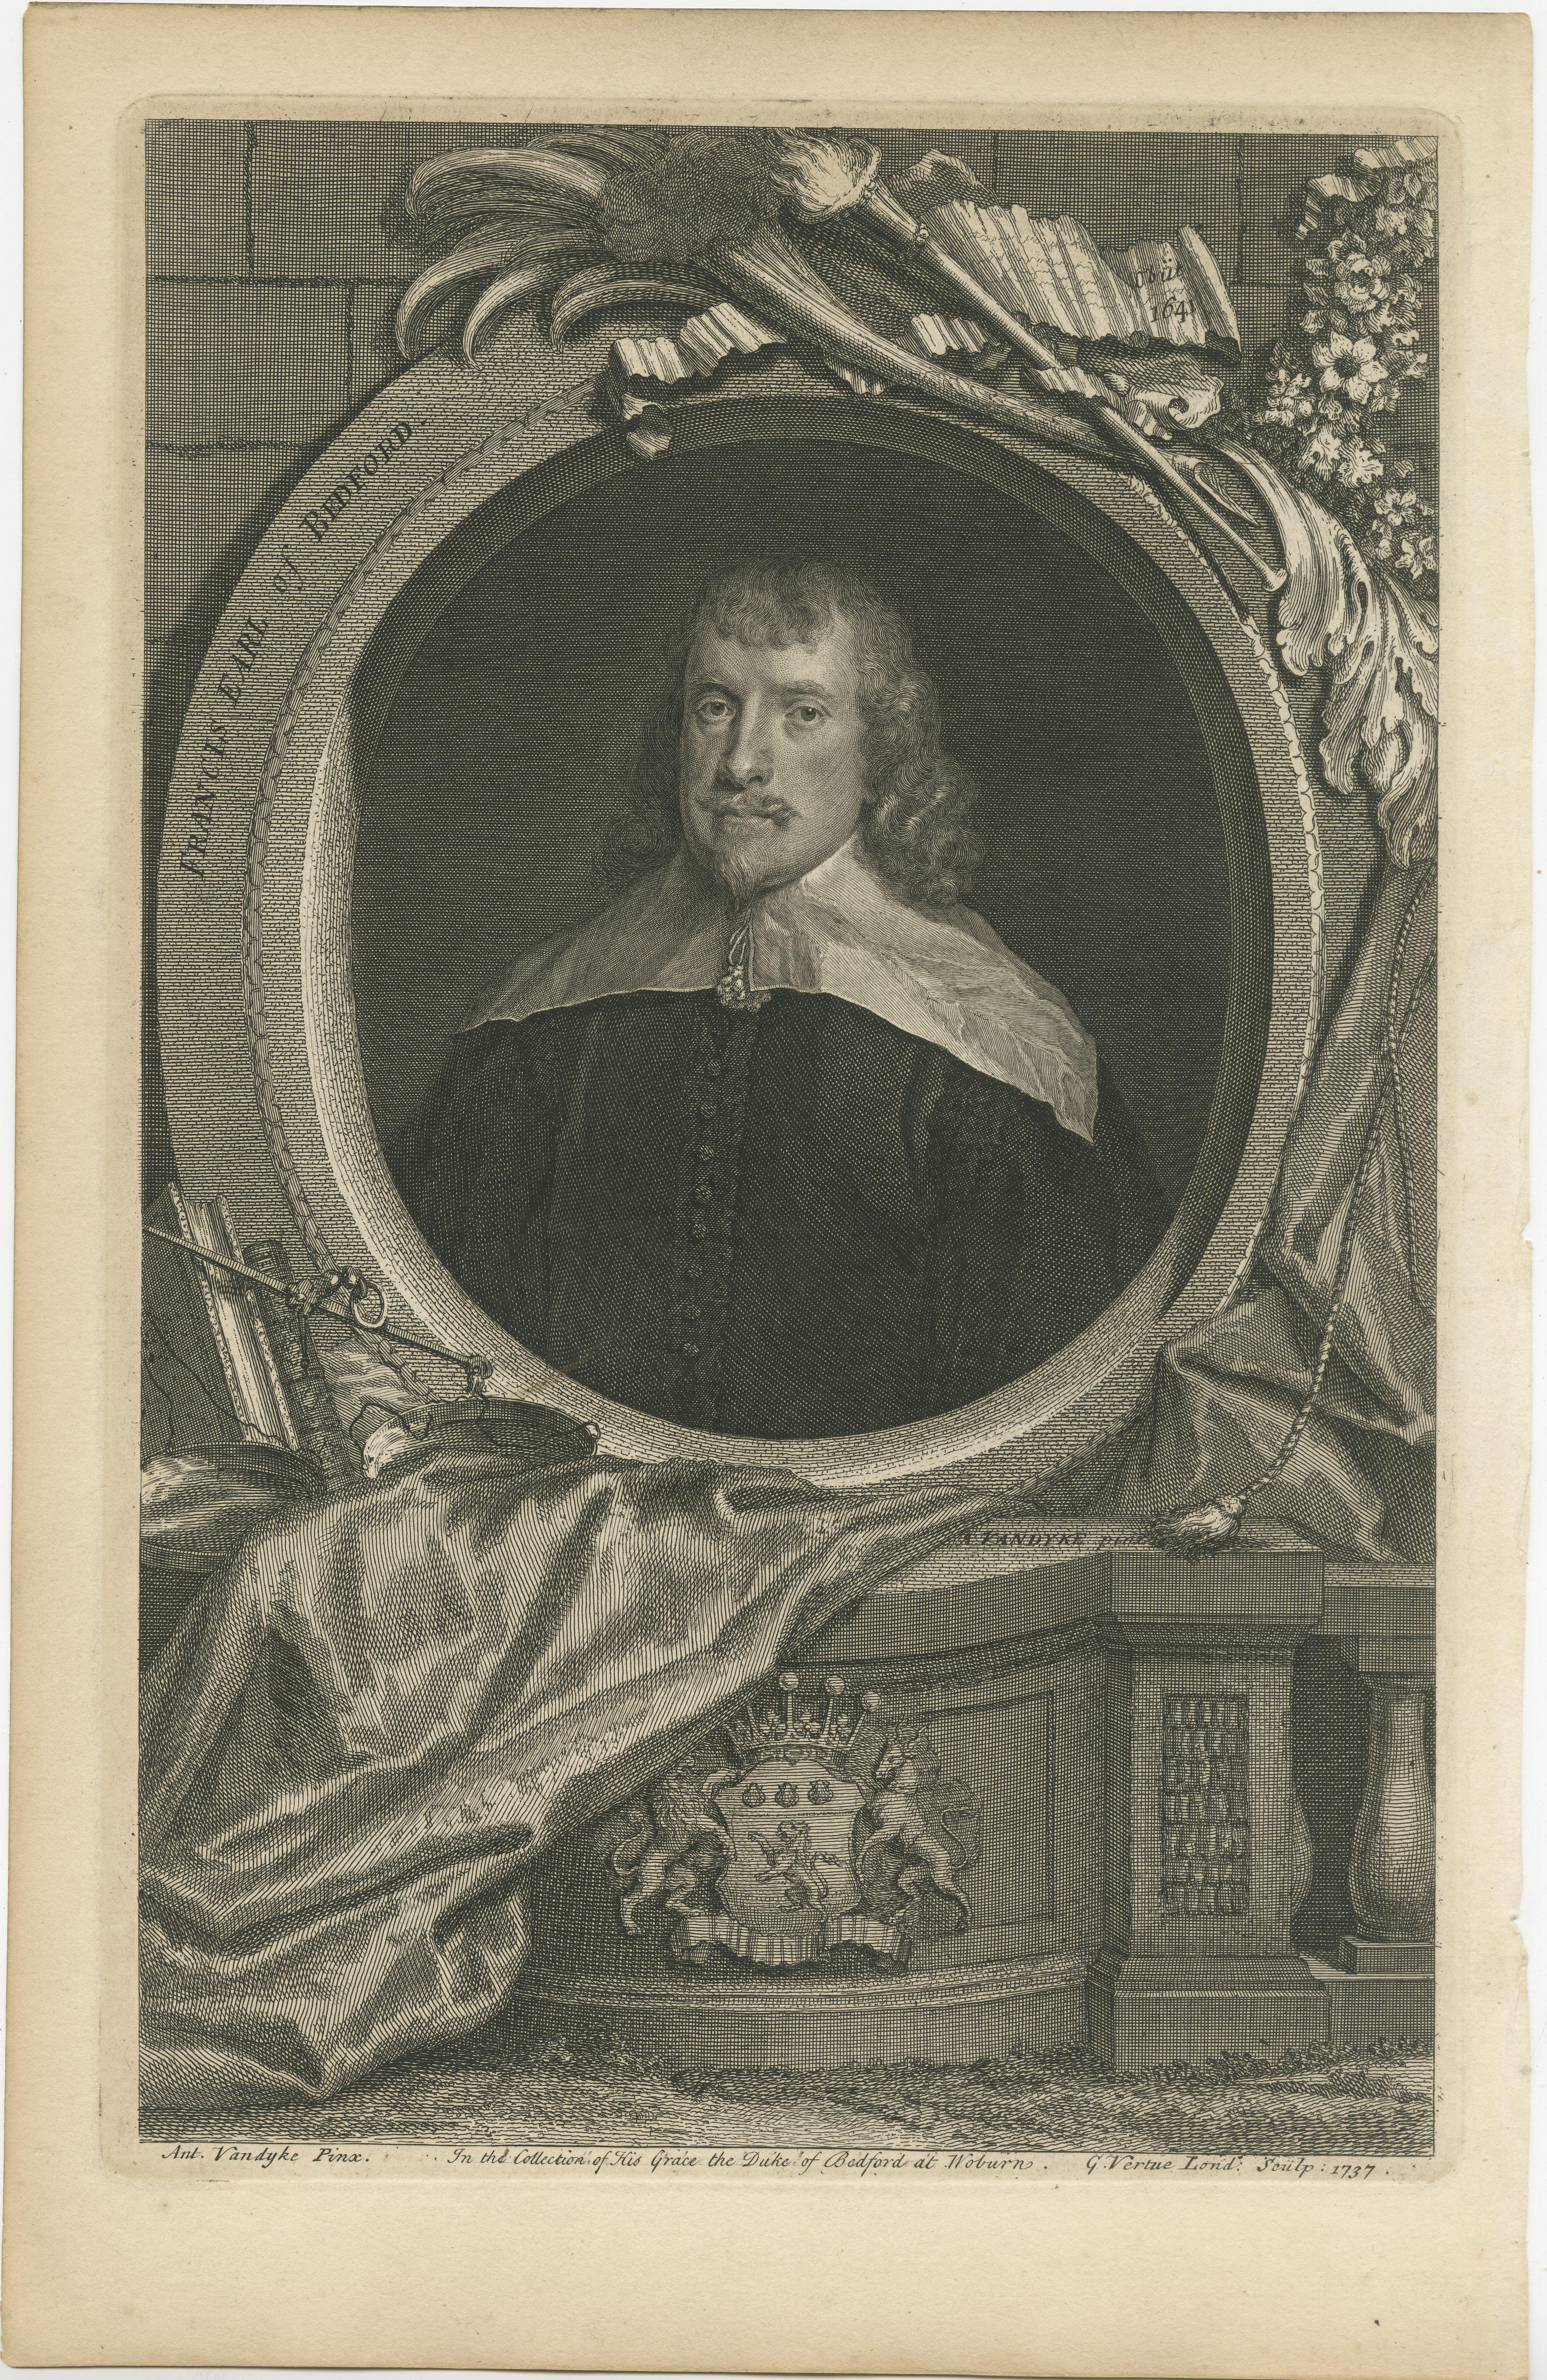 Antique portrait titled 'Francis Earl of Bedford'. Francis Russell, 4th Earl of Bedford PC (1587 – 9 May 1641) was an English nobleman and politician. He built the square of Covent Garden, with the piazza and church of St. Paul's, employing Inigo